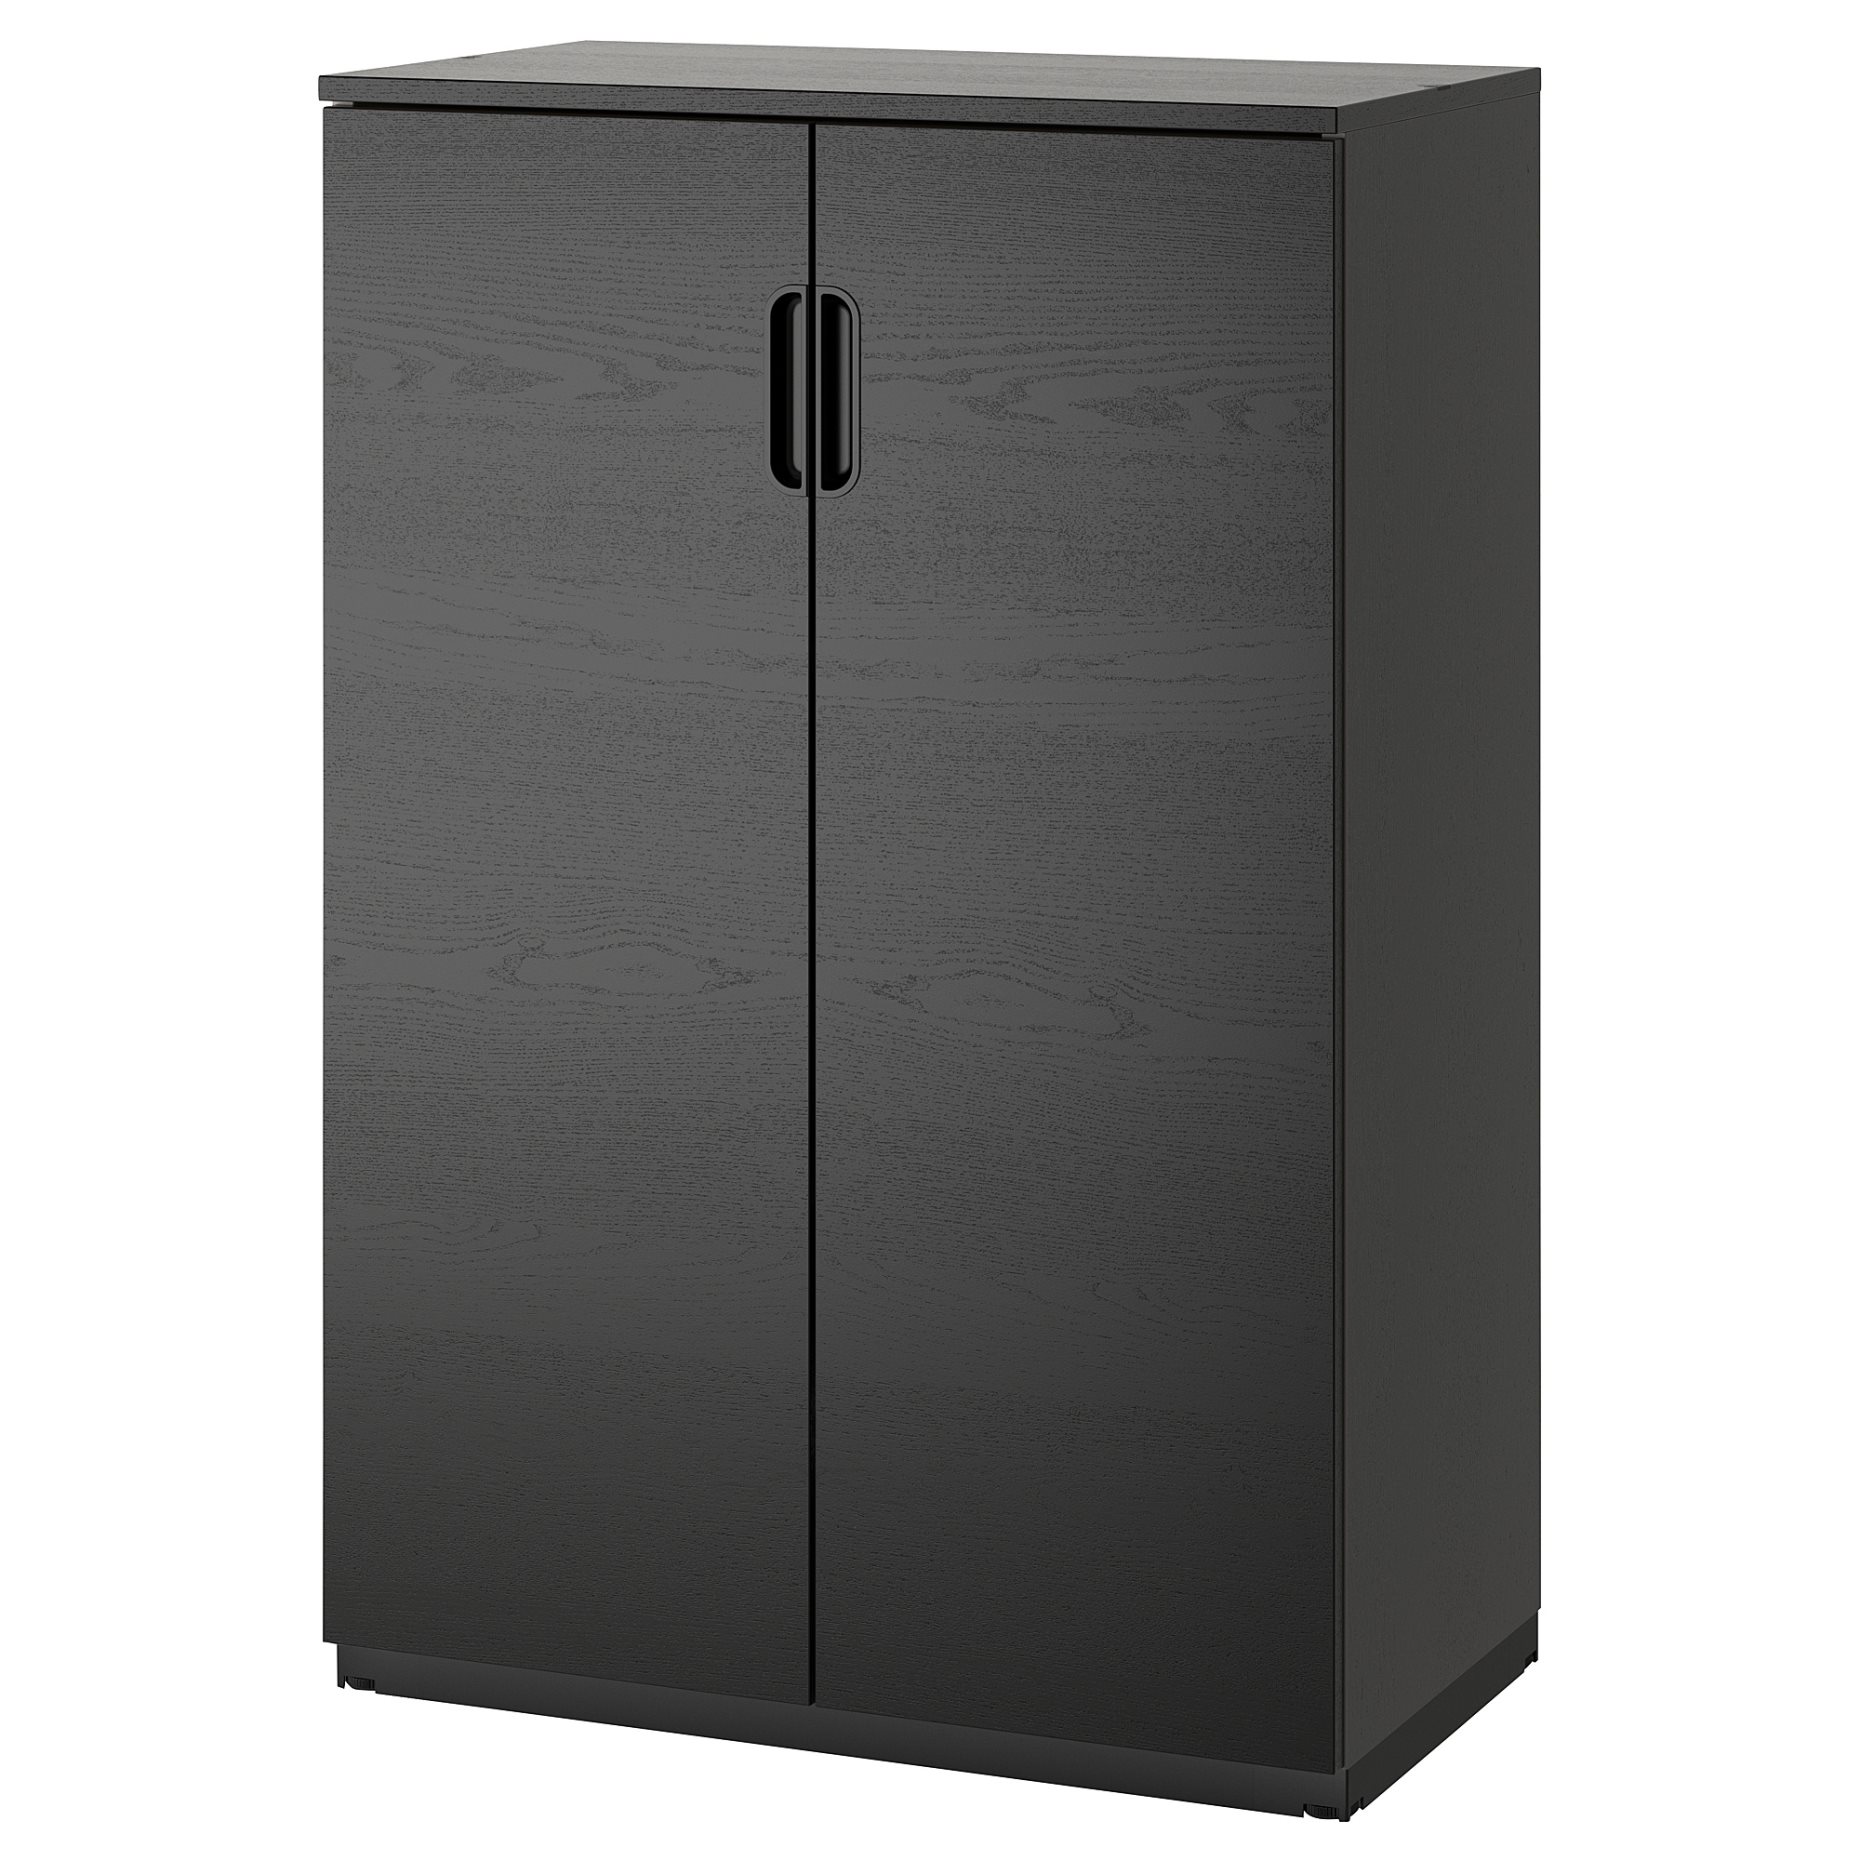 GALANT, cabinet with doors, 503.651.39